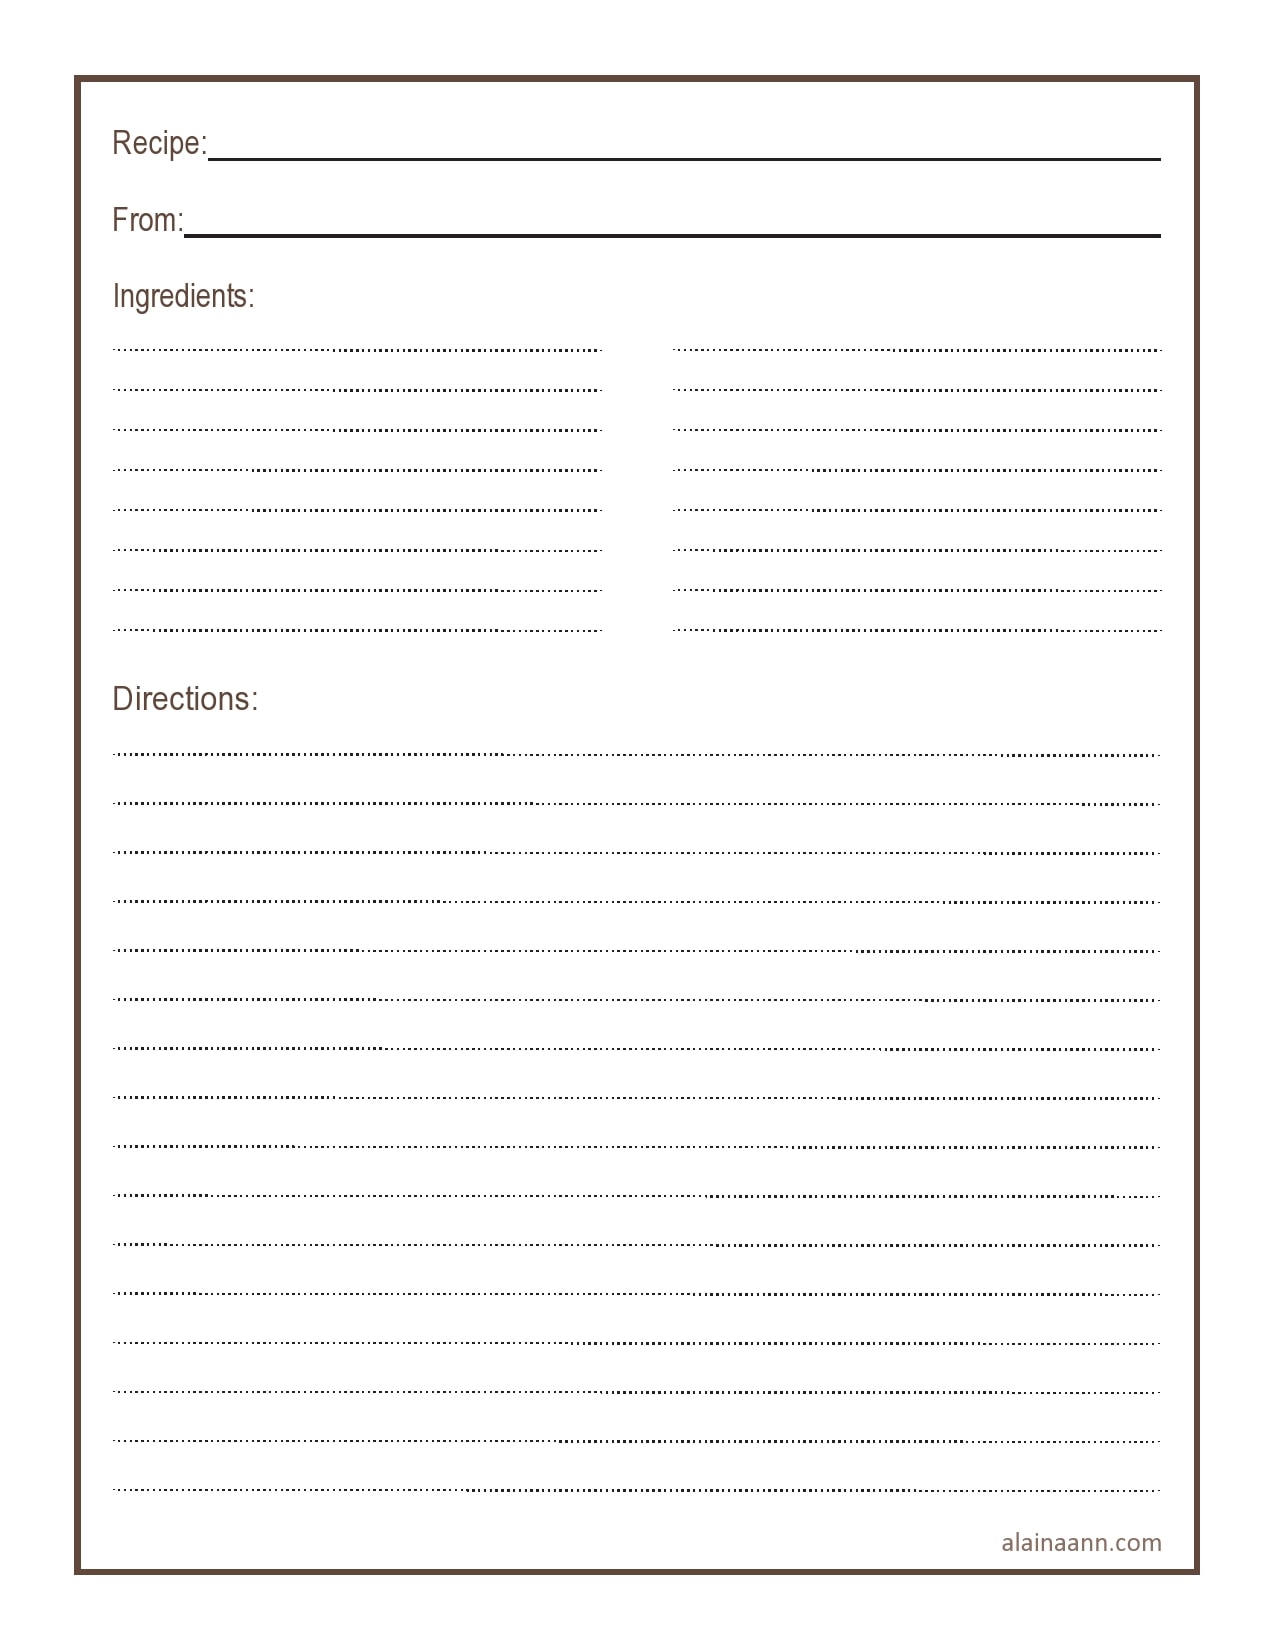 21 Free Recipe Card Templates (Word, Google Docs) - TemplateArchive With Full Page Recipe Template For Word